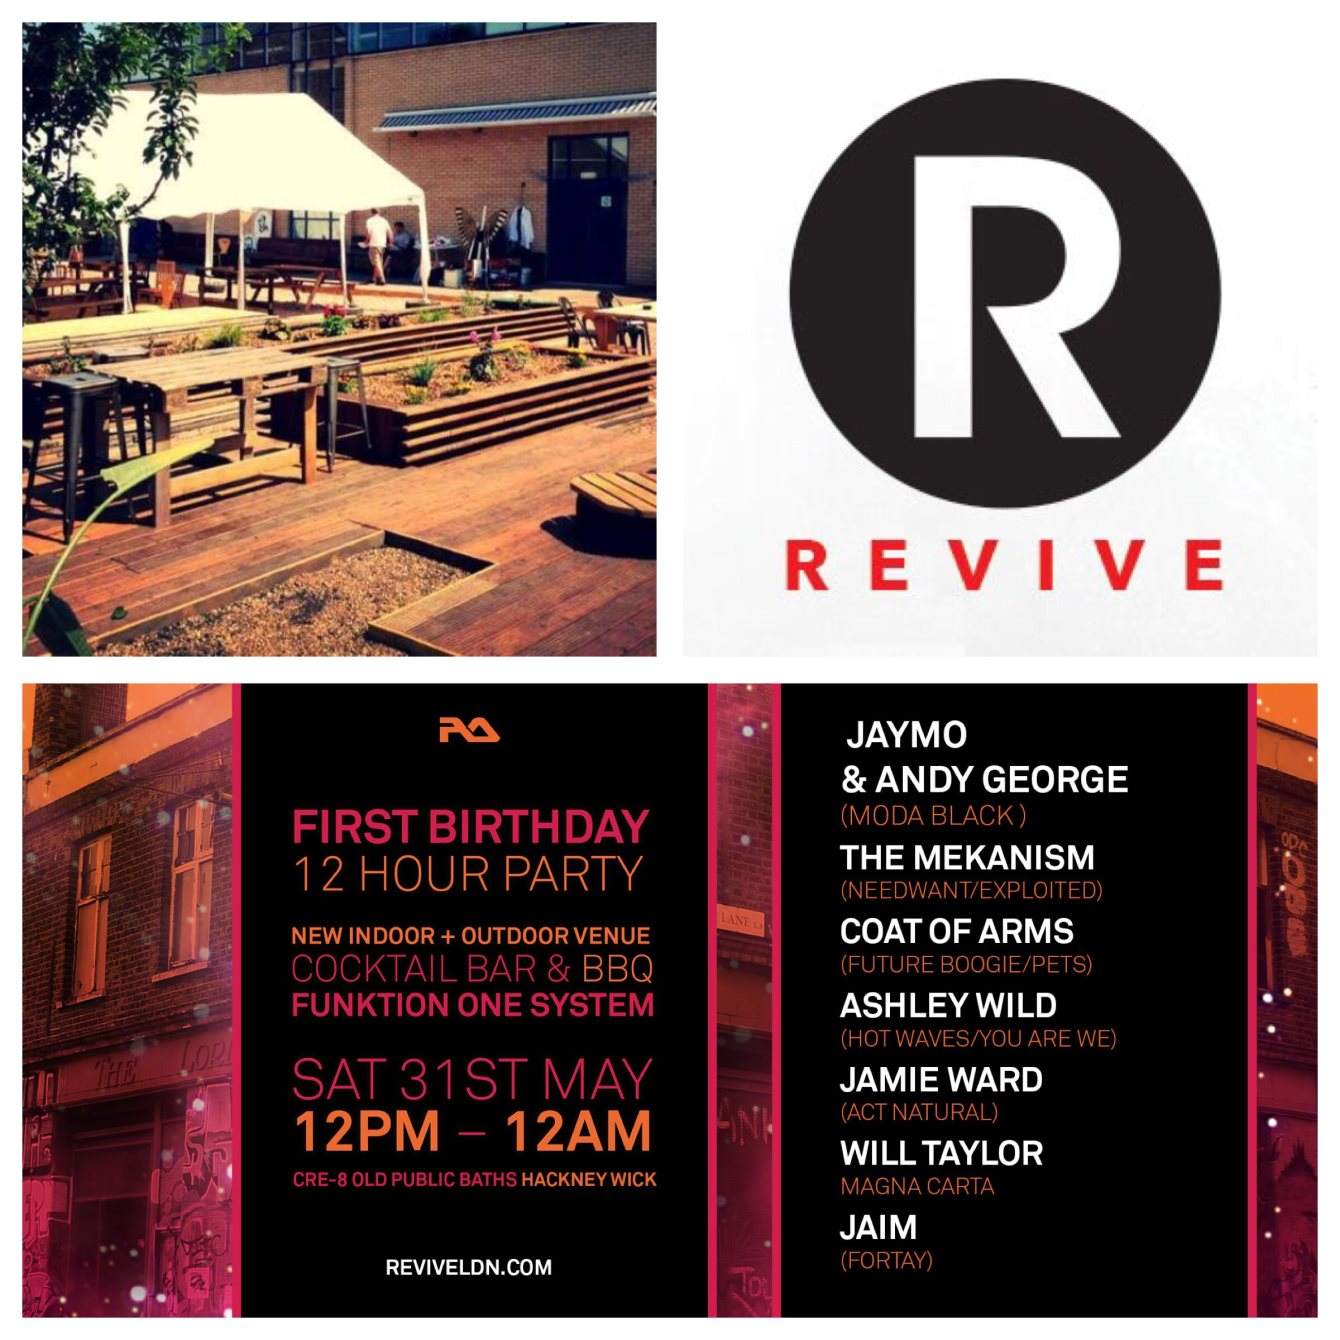 Revive London's 1st Birthday with Jaymo & Andy George, The Mekanism, Coat Of Arms, Ashley Wild - フライヤー表